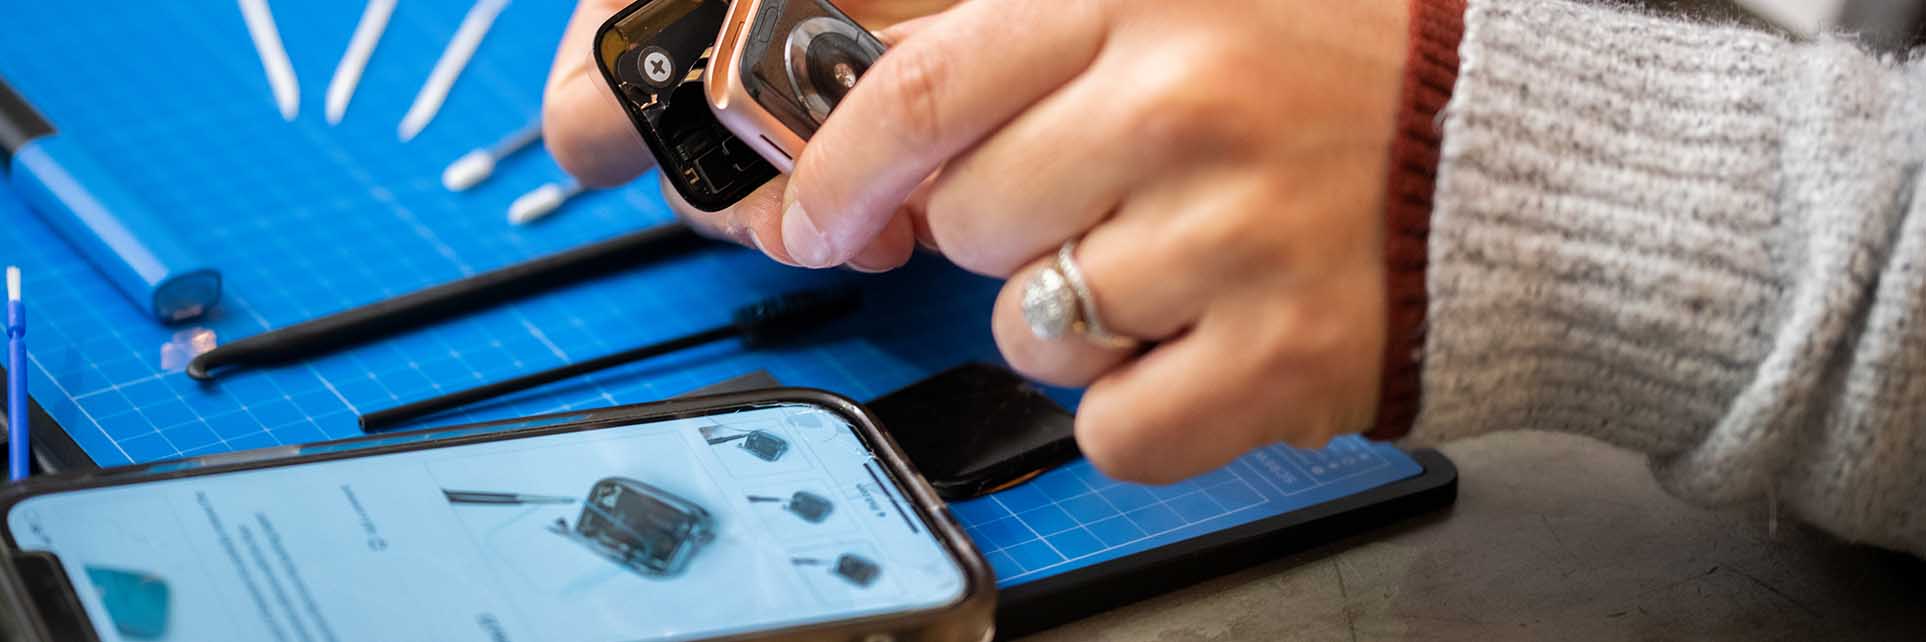 Breaking: Minnesota’s New Right to Repair Law Will Give the Whole World Repair Manuals